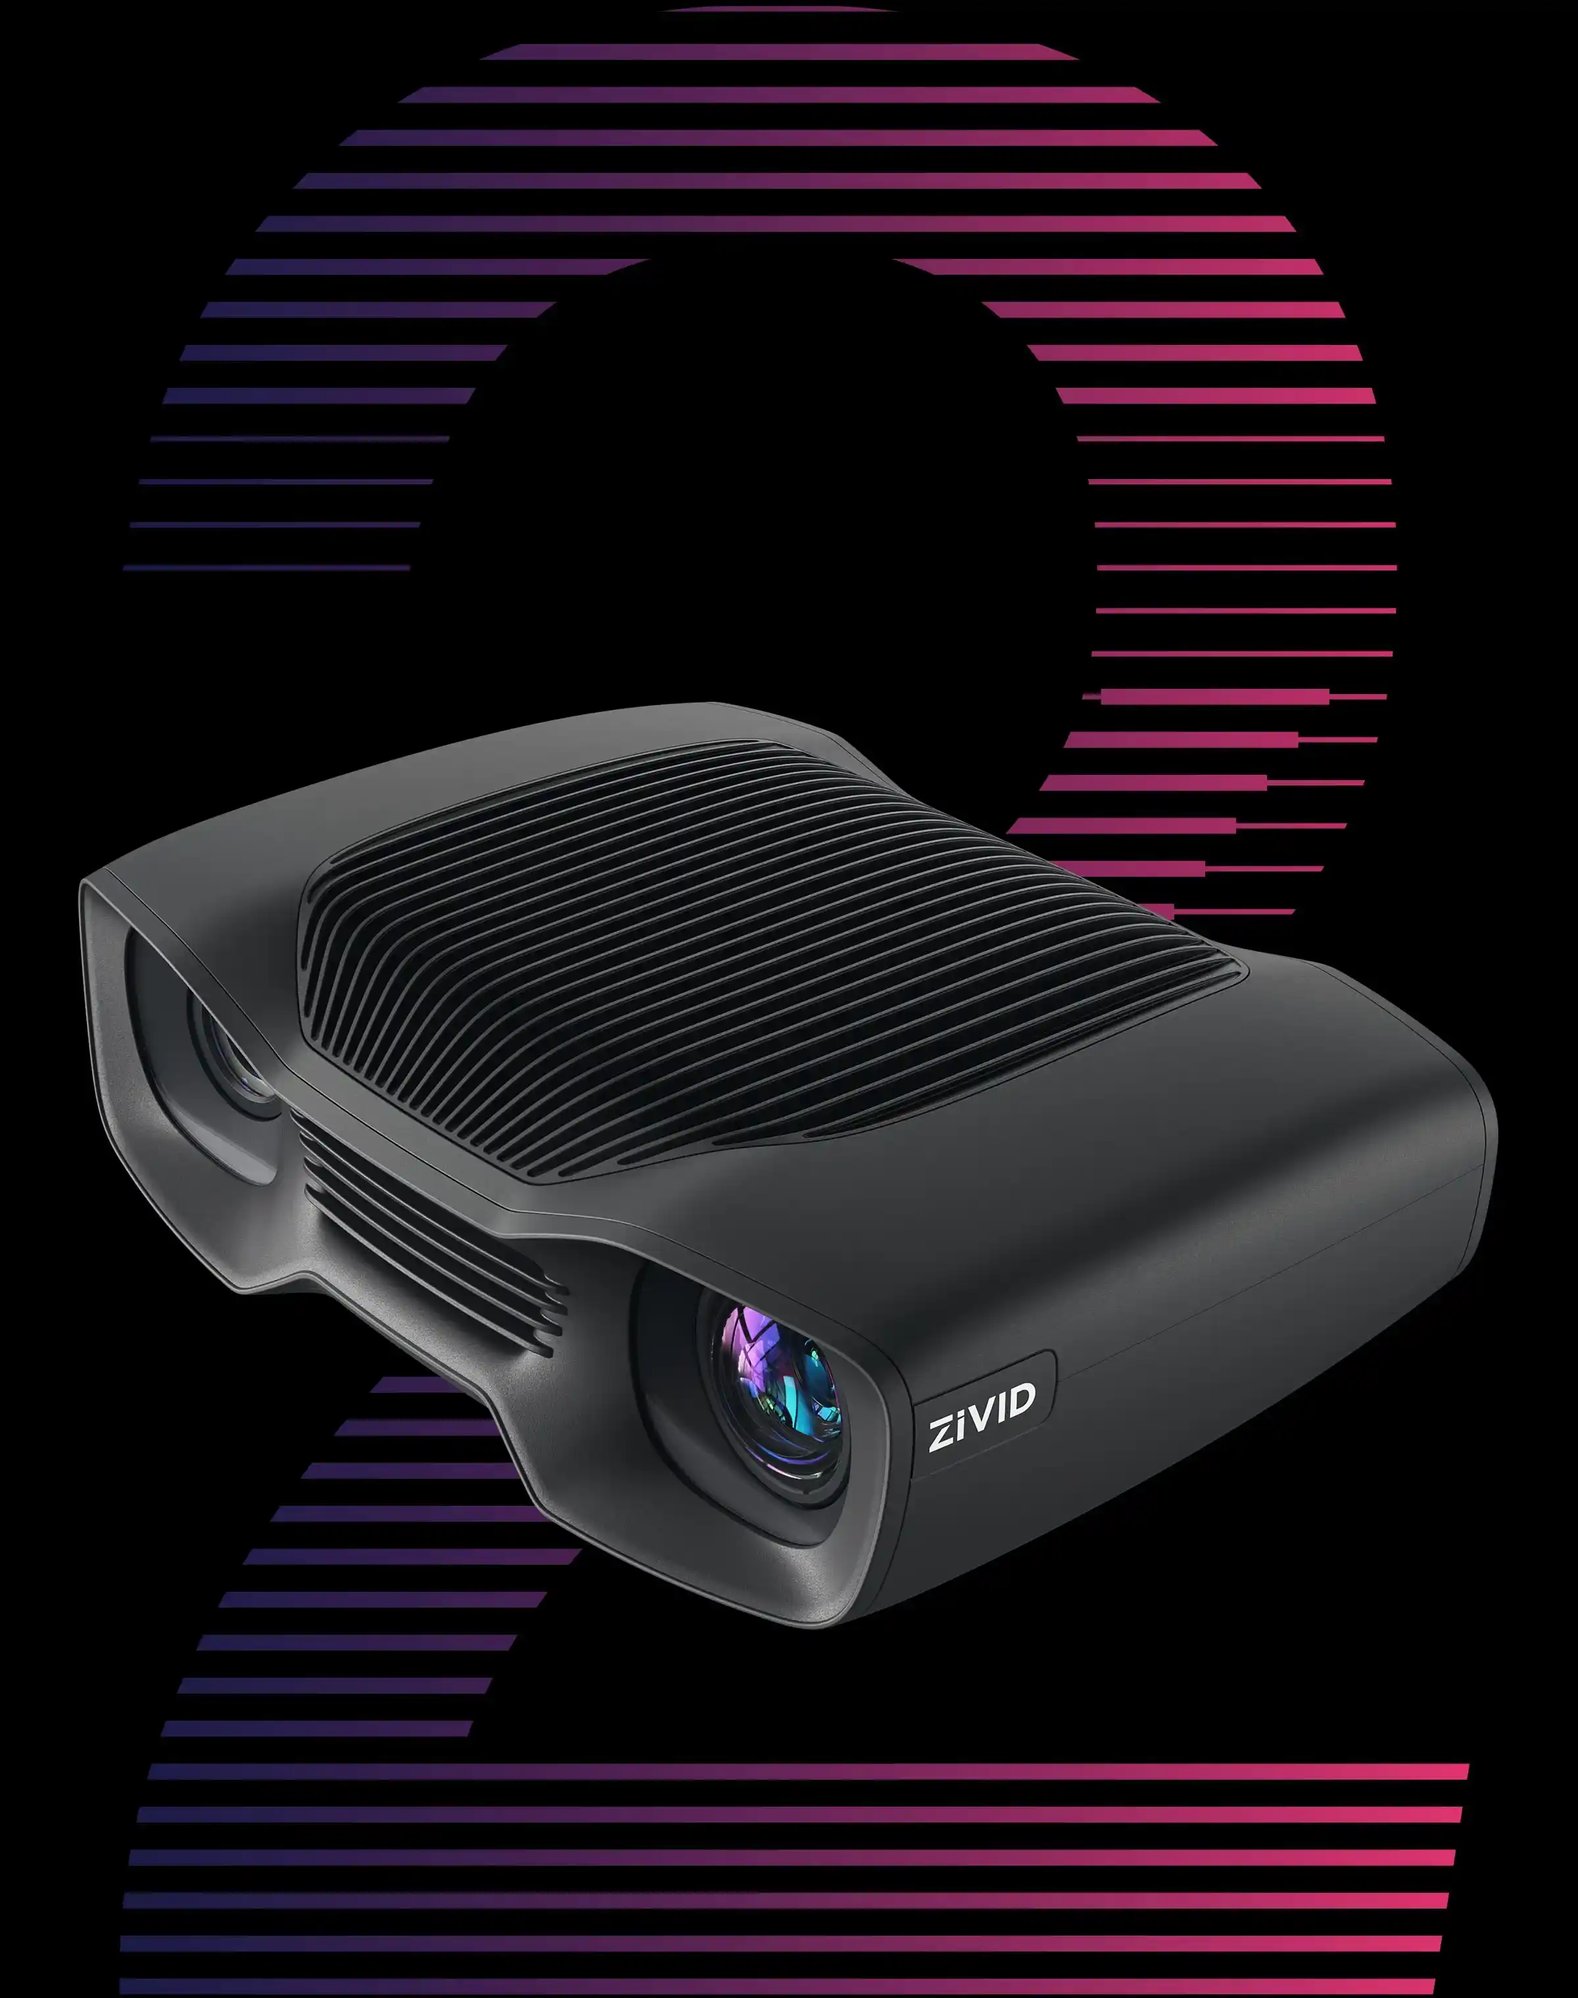 Zivid-Two-Industrial-3D-color-camera-bg_7_11zon